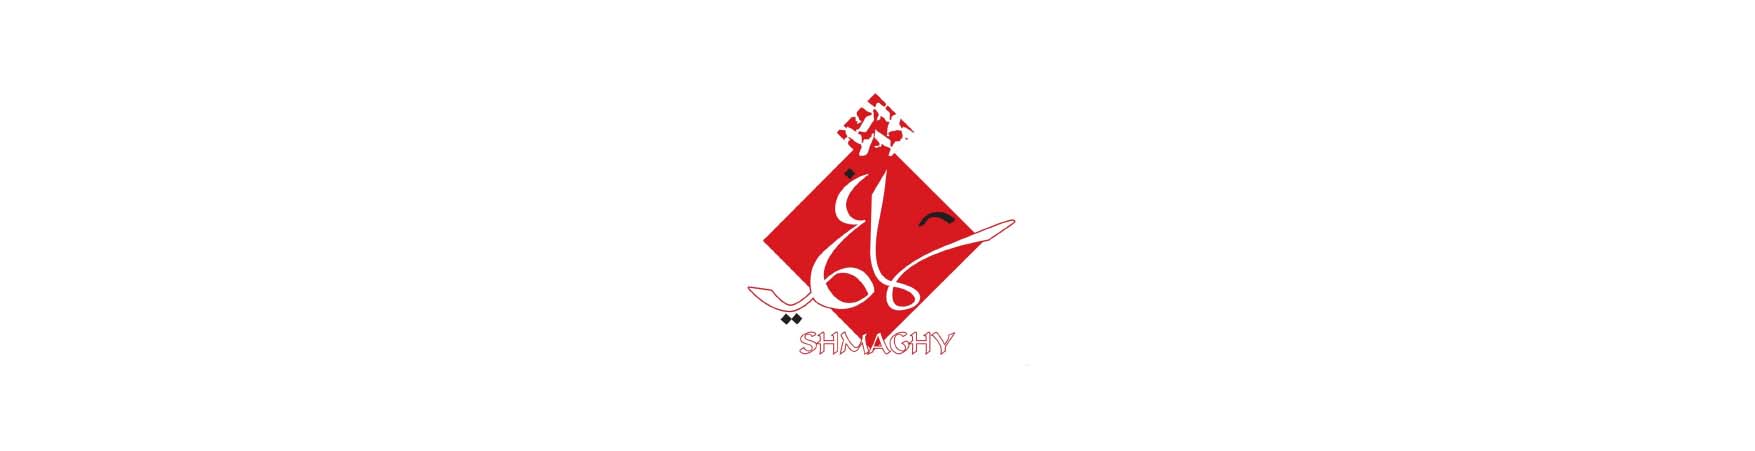 Shmaghy